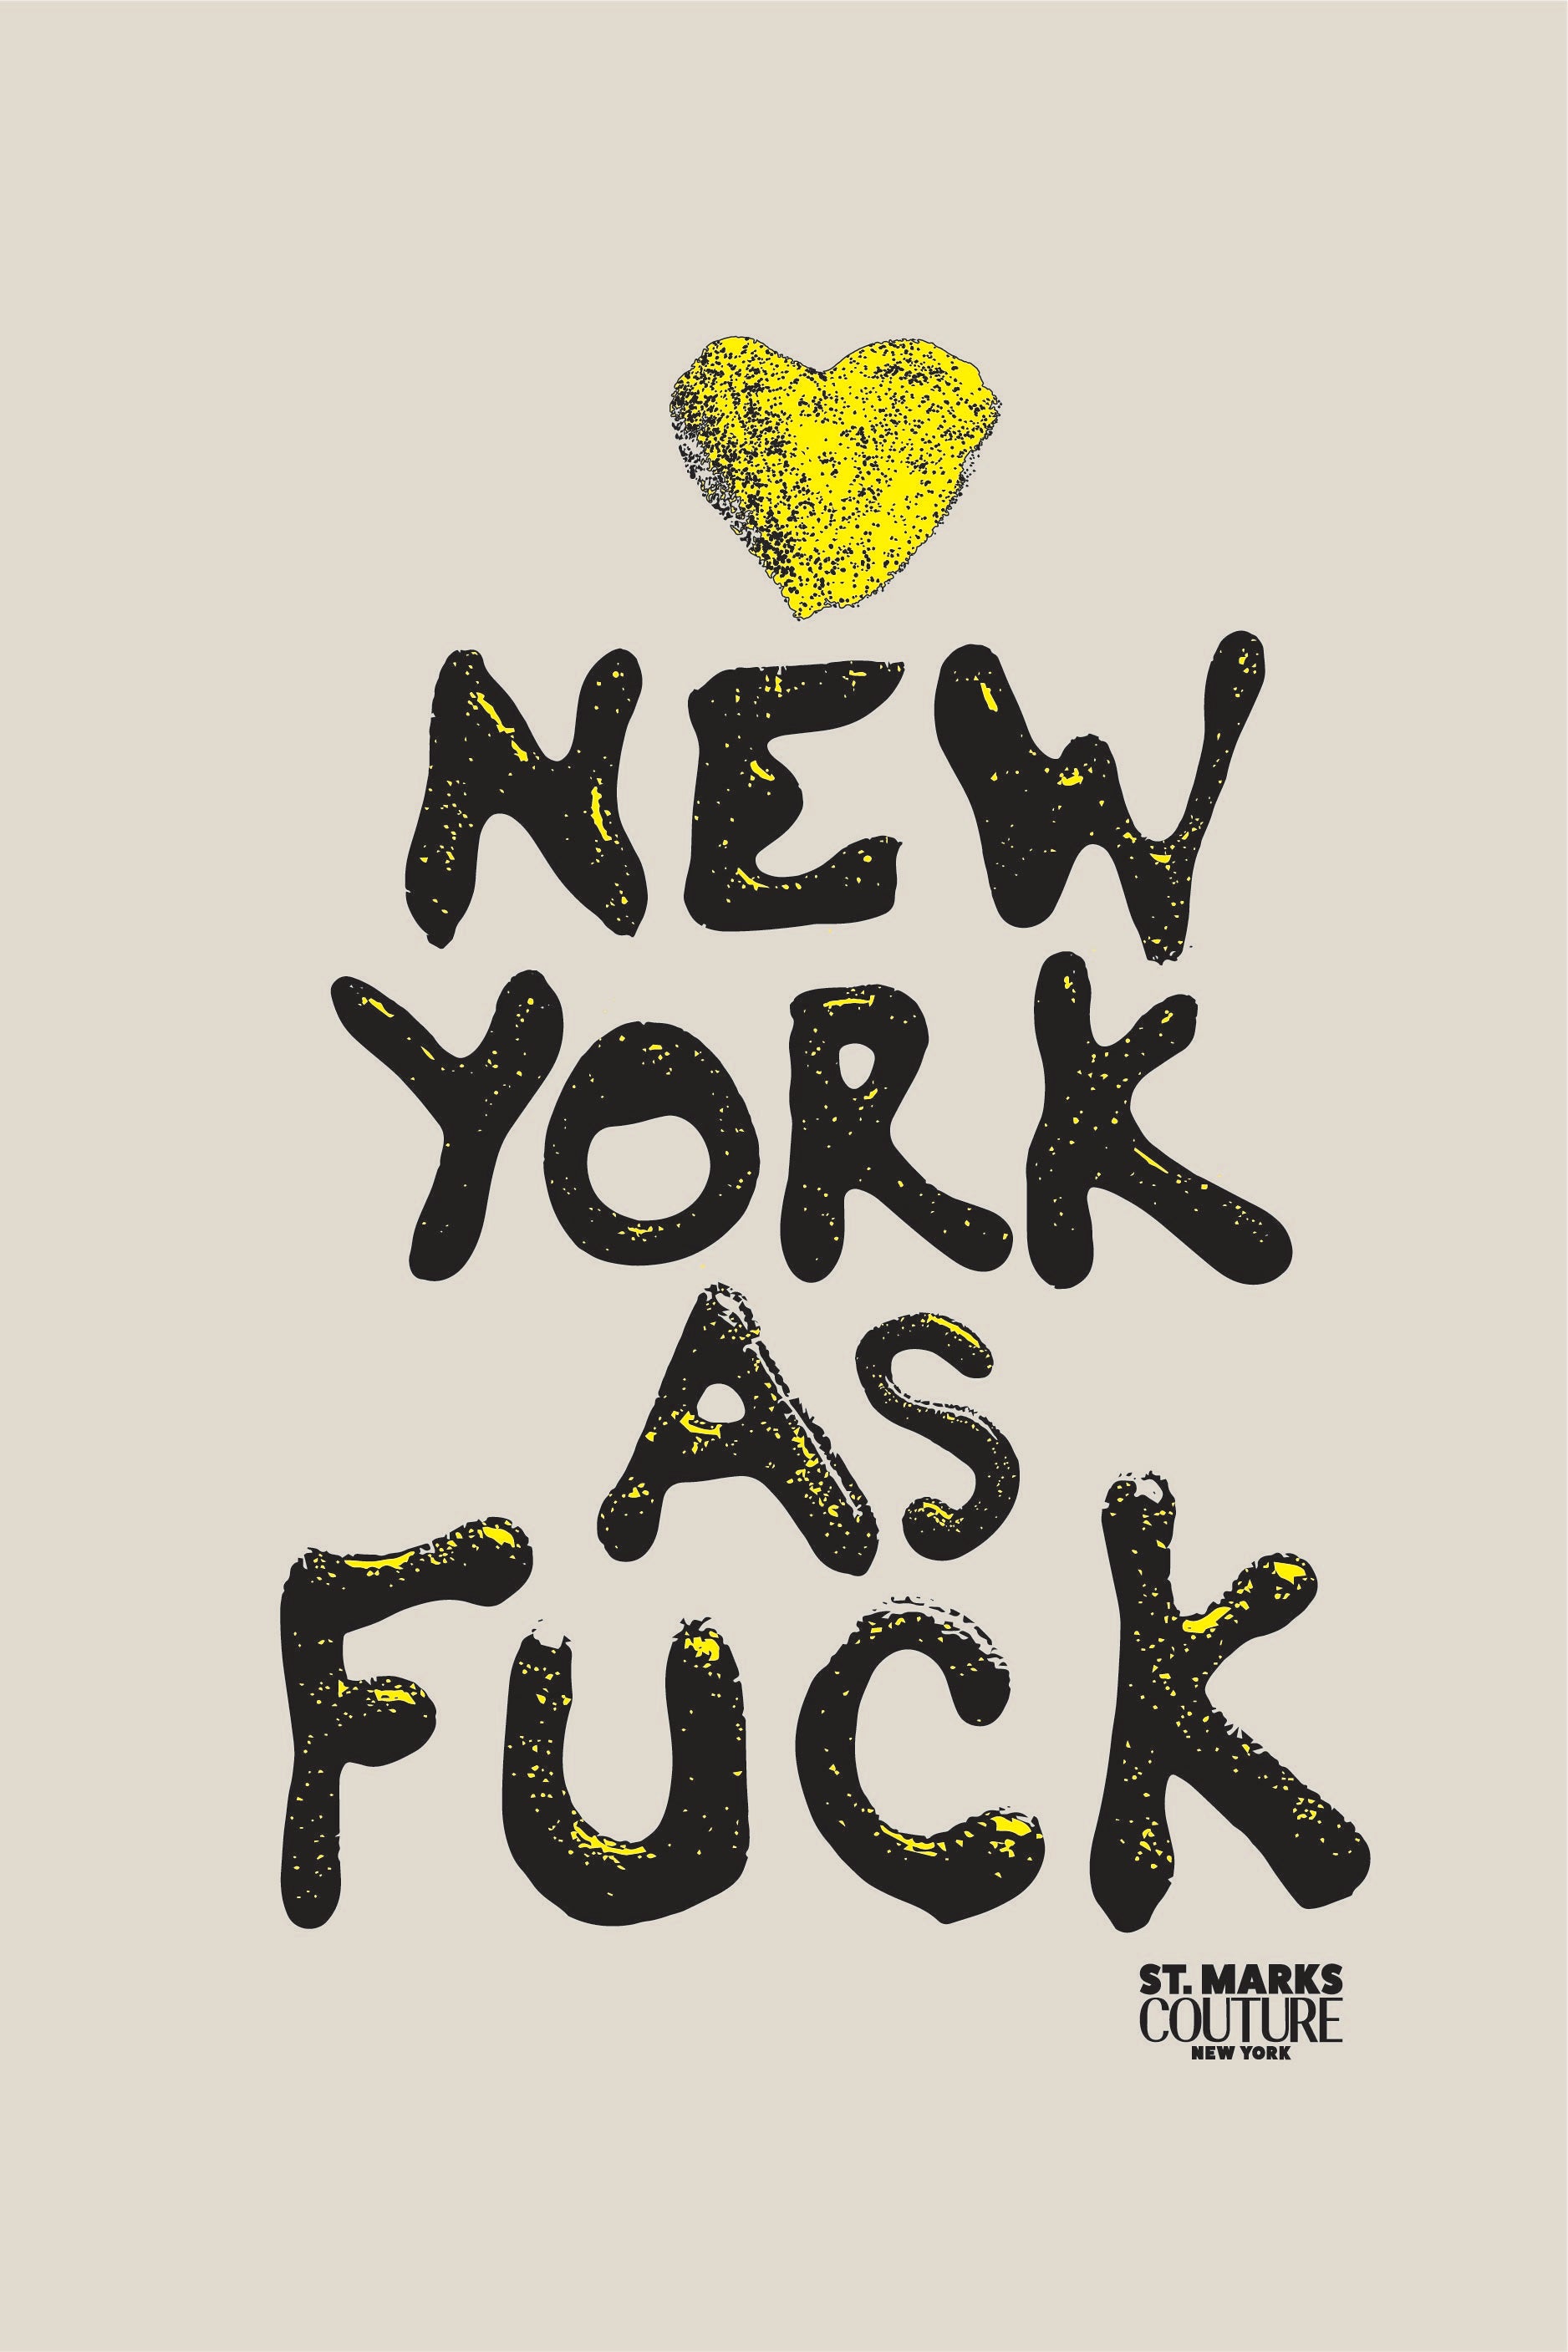 THE NEW YORK AS FUCK TOTE